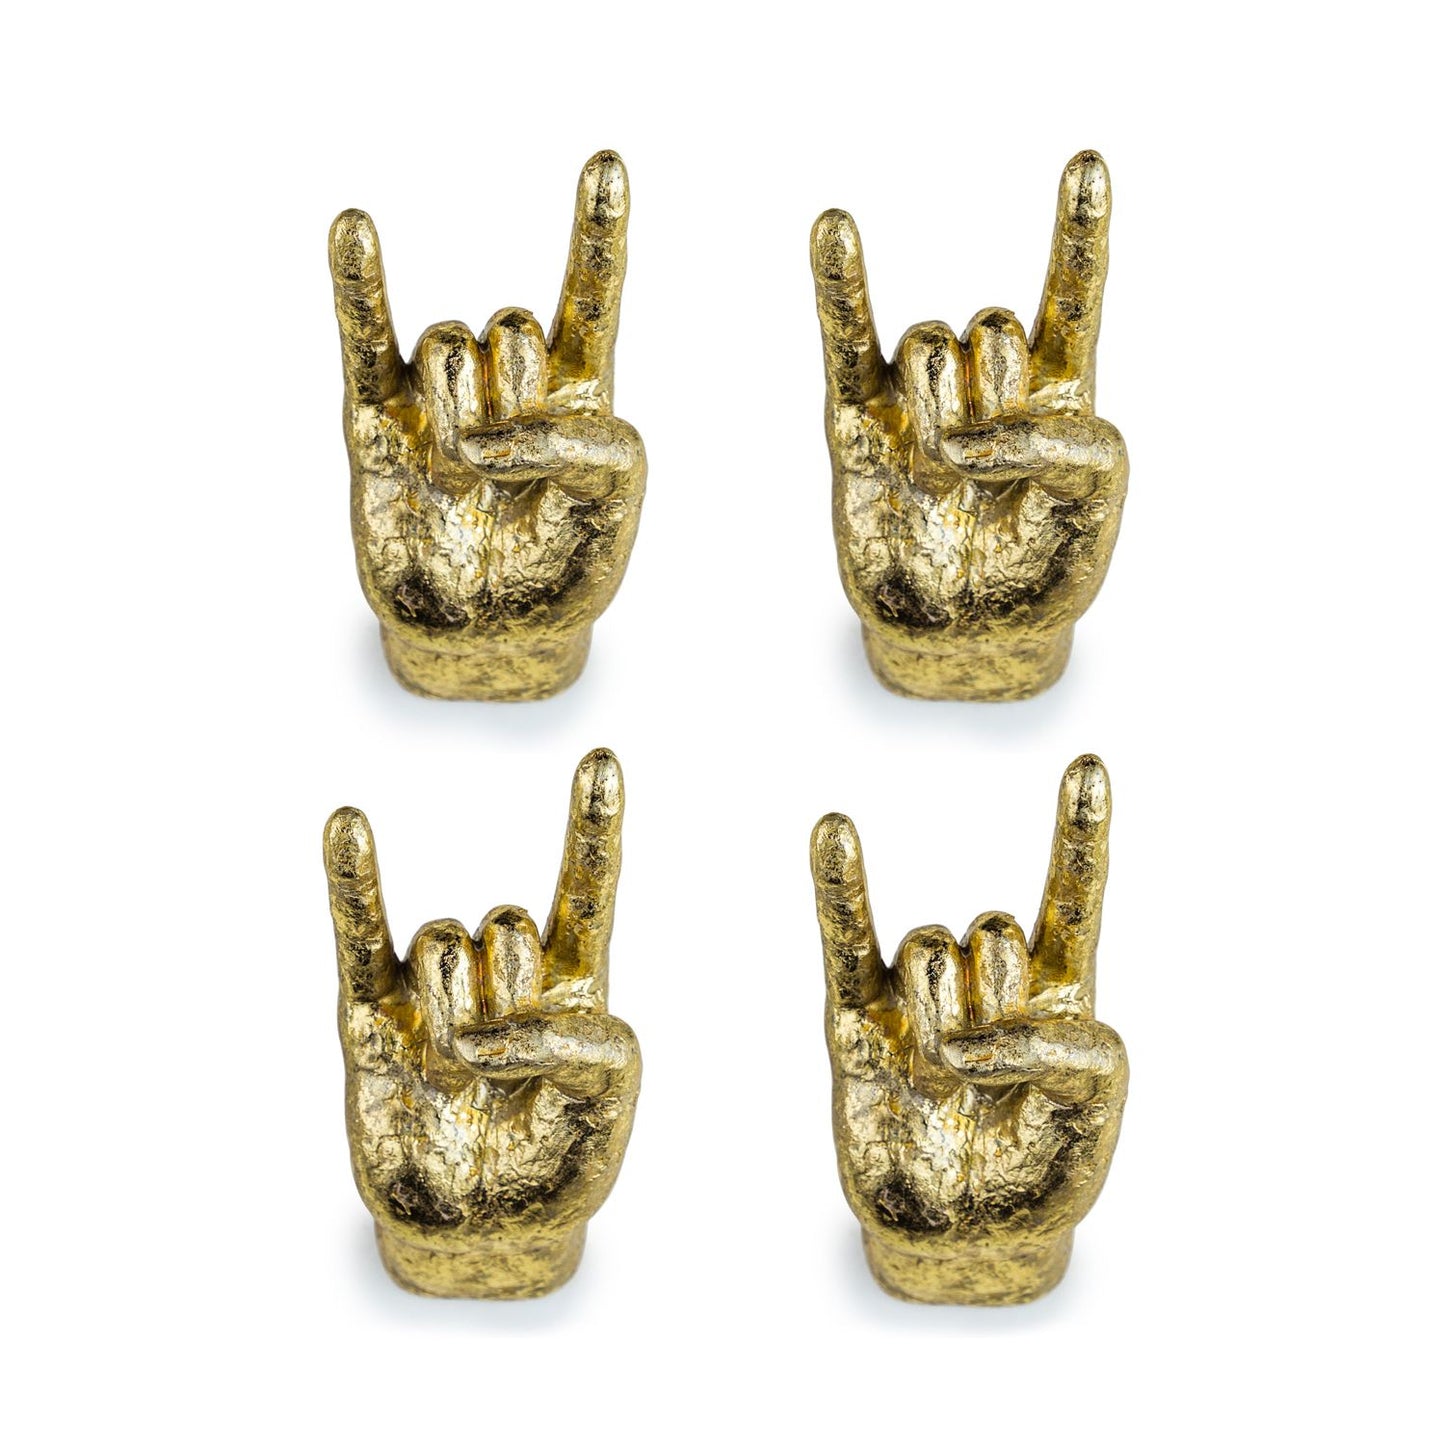  Set of 4 Rock On Wall Hands